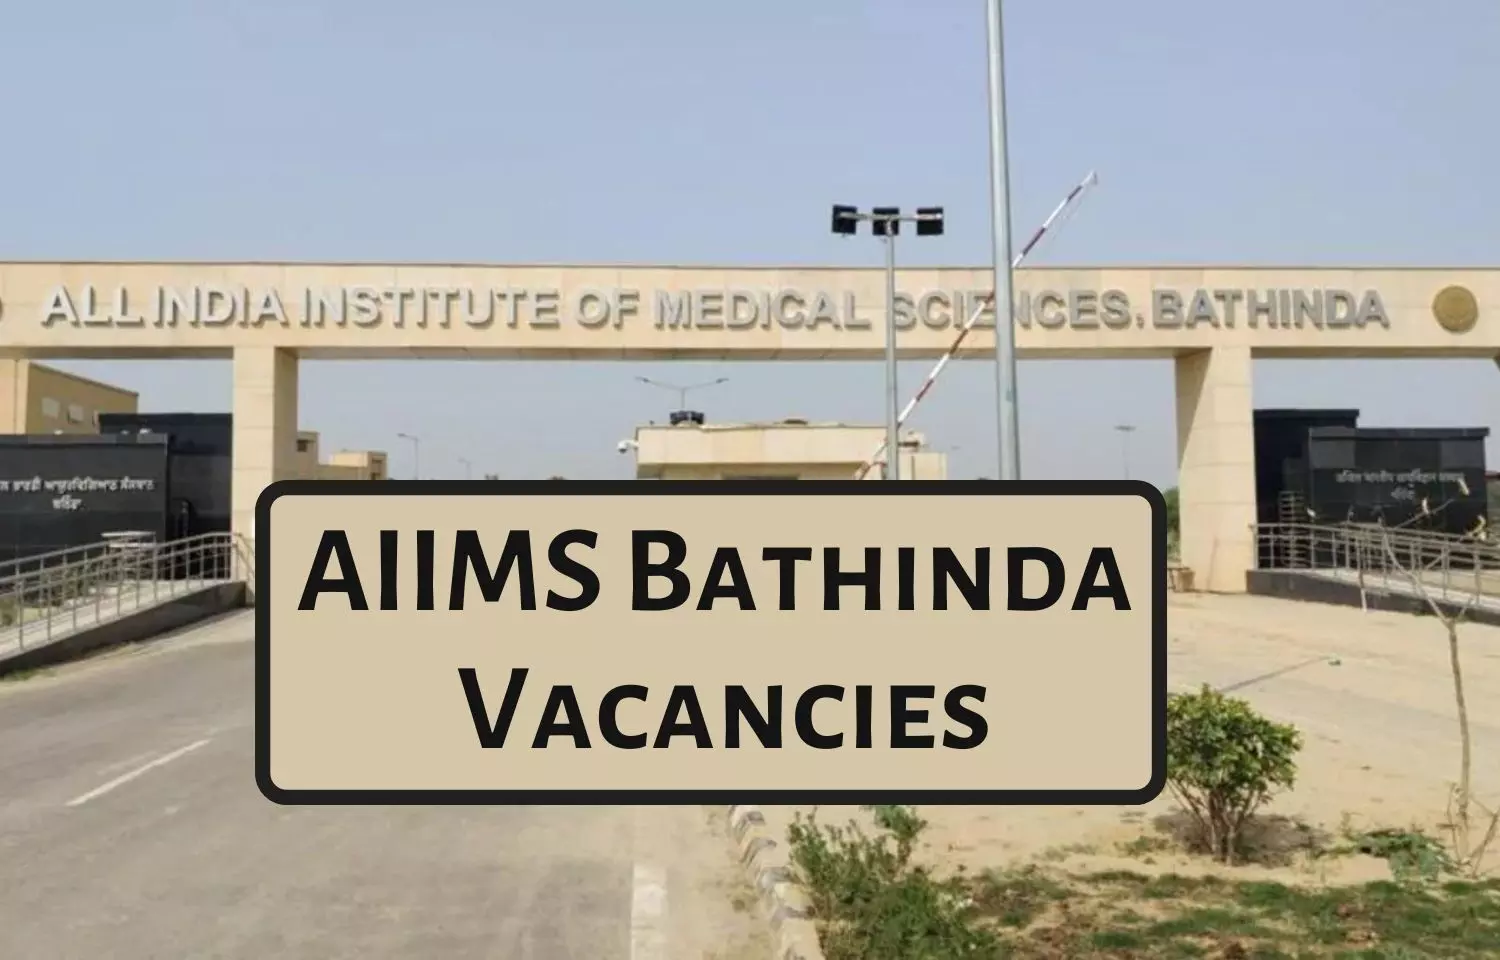 Apply Now At AIIMS Bathinda For Faculty Post In Various Departments: Check all Details